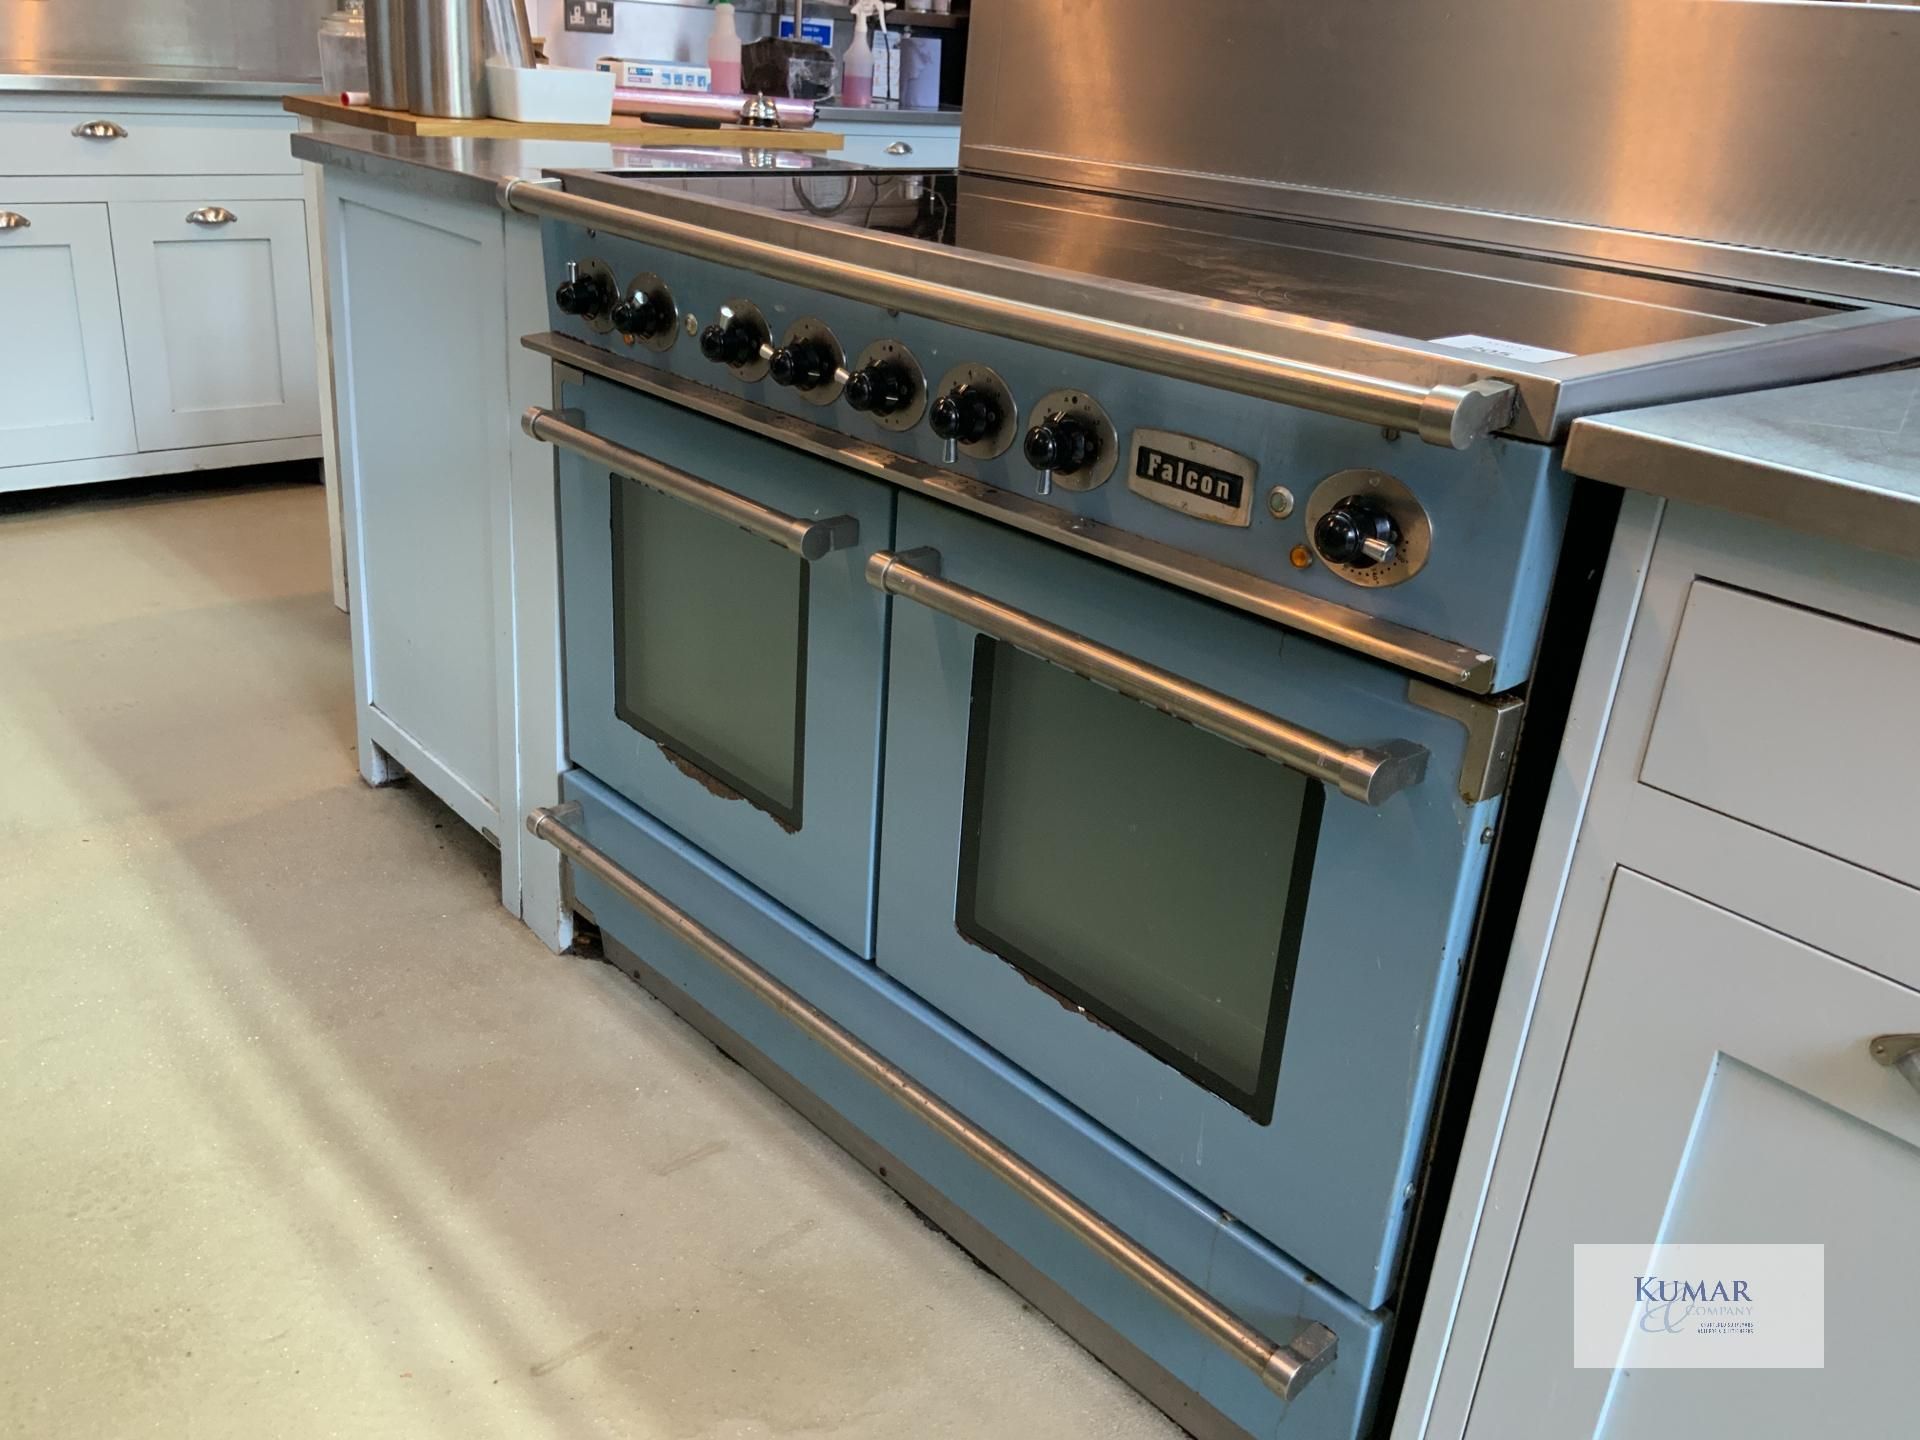 China Blue Aga Rangemaster Falcon Continental 1092 Range Cookers with Twin Ovens & 5 Position - Image 3 of 8